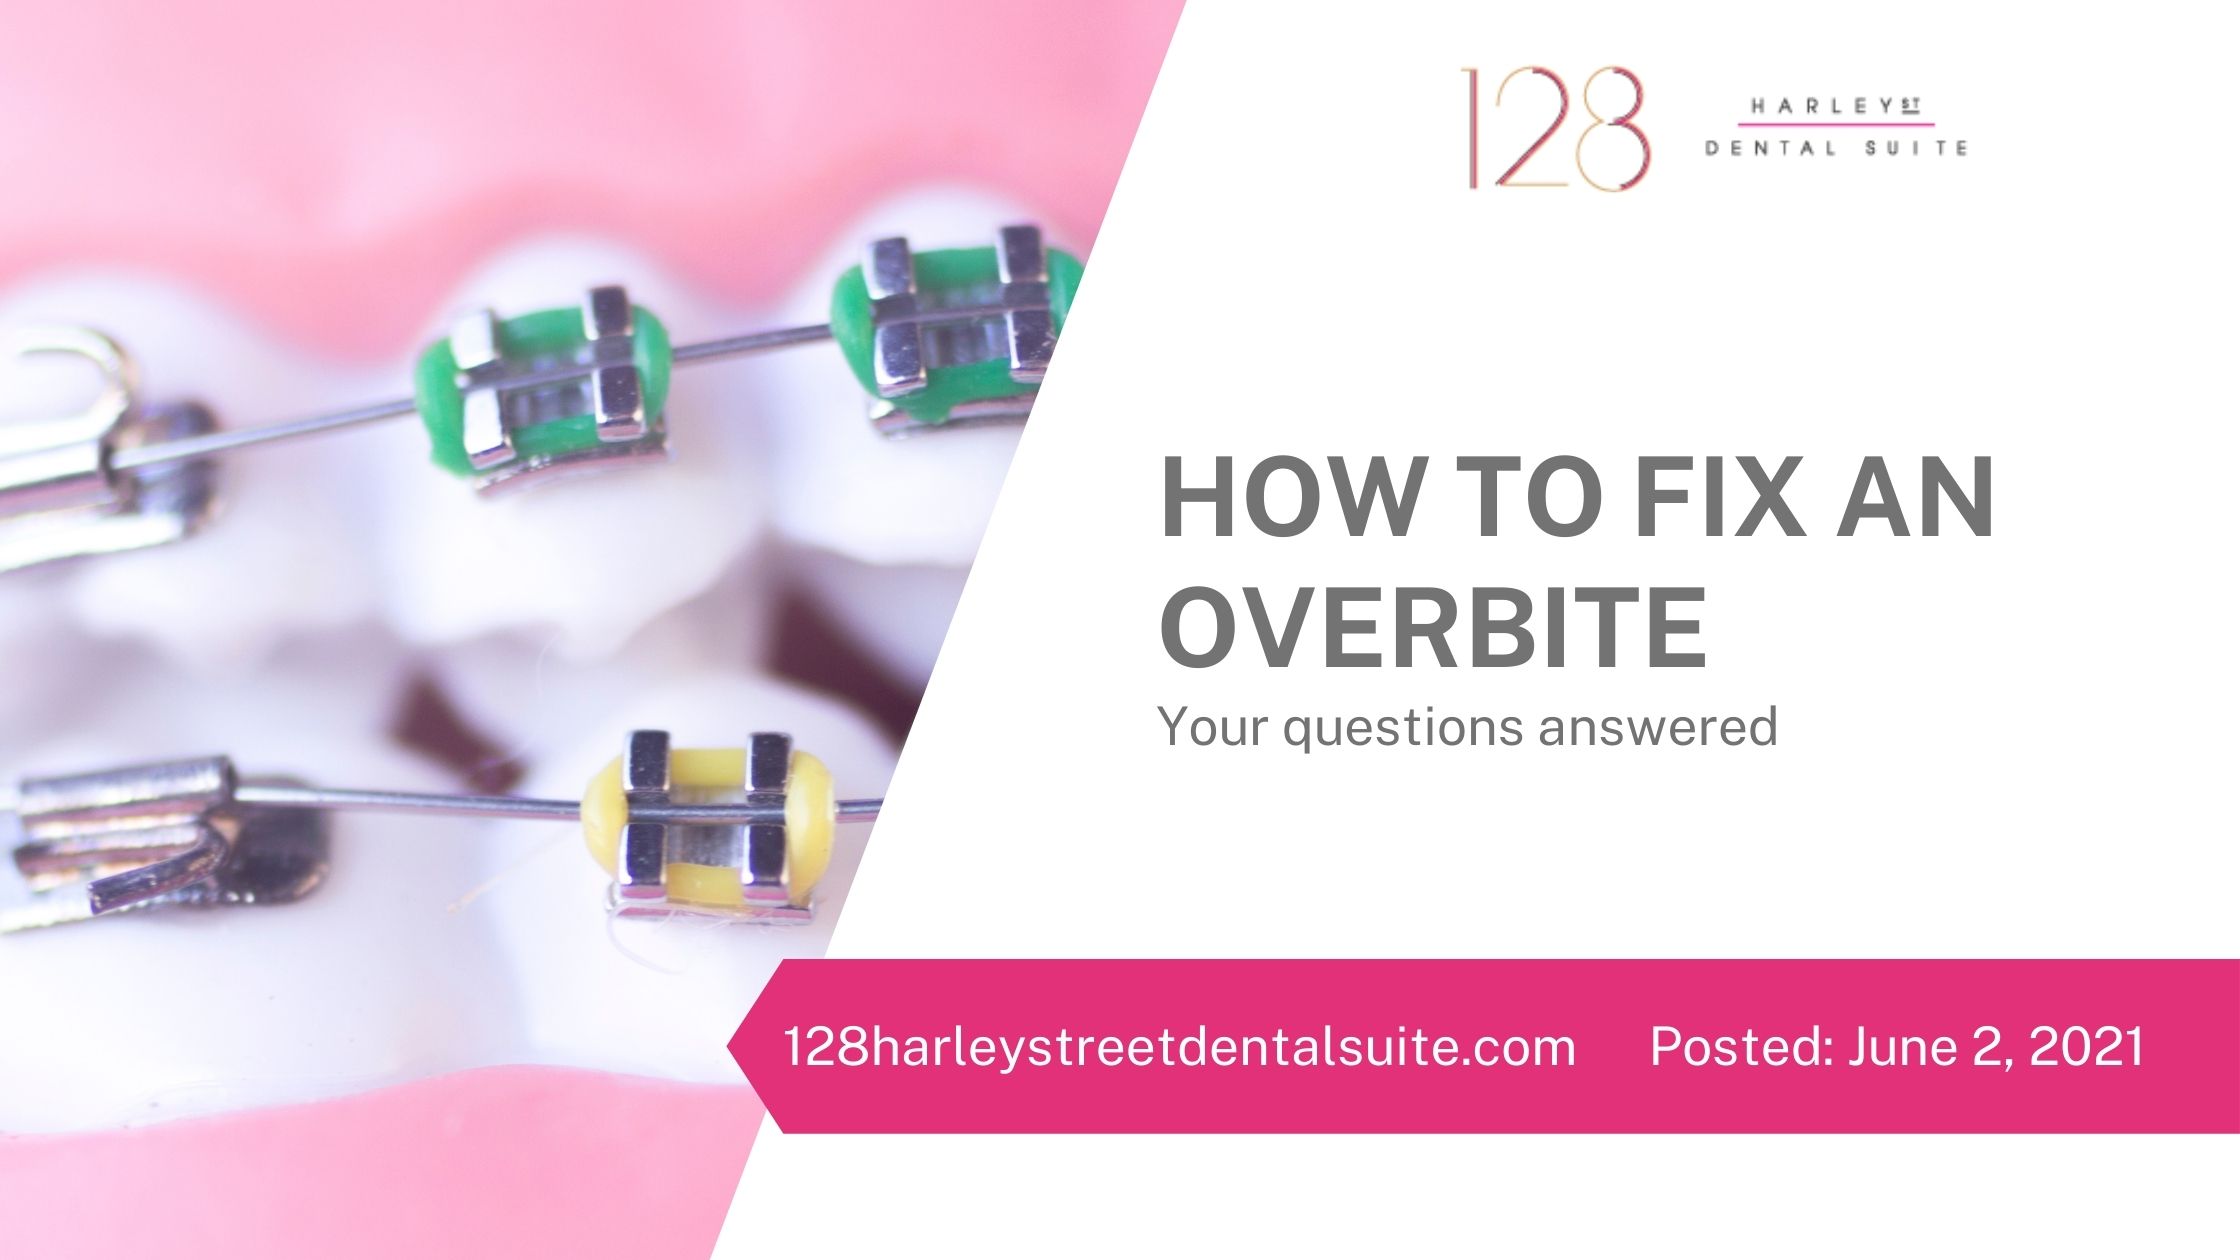 How To Fix An Overbite